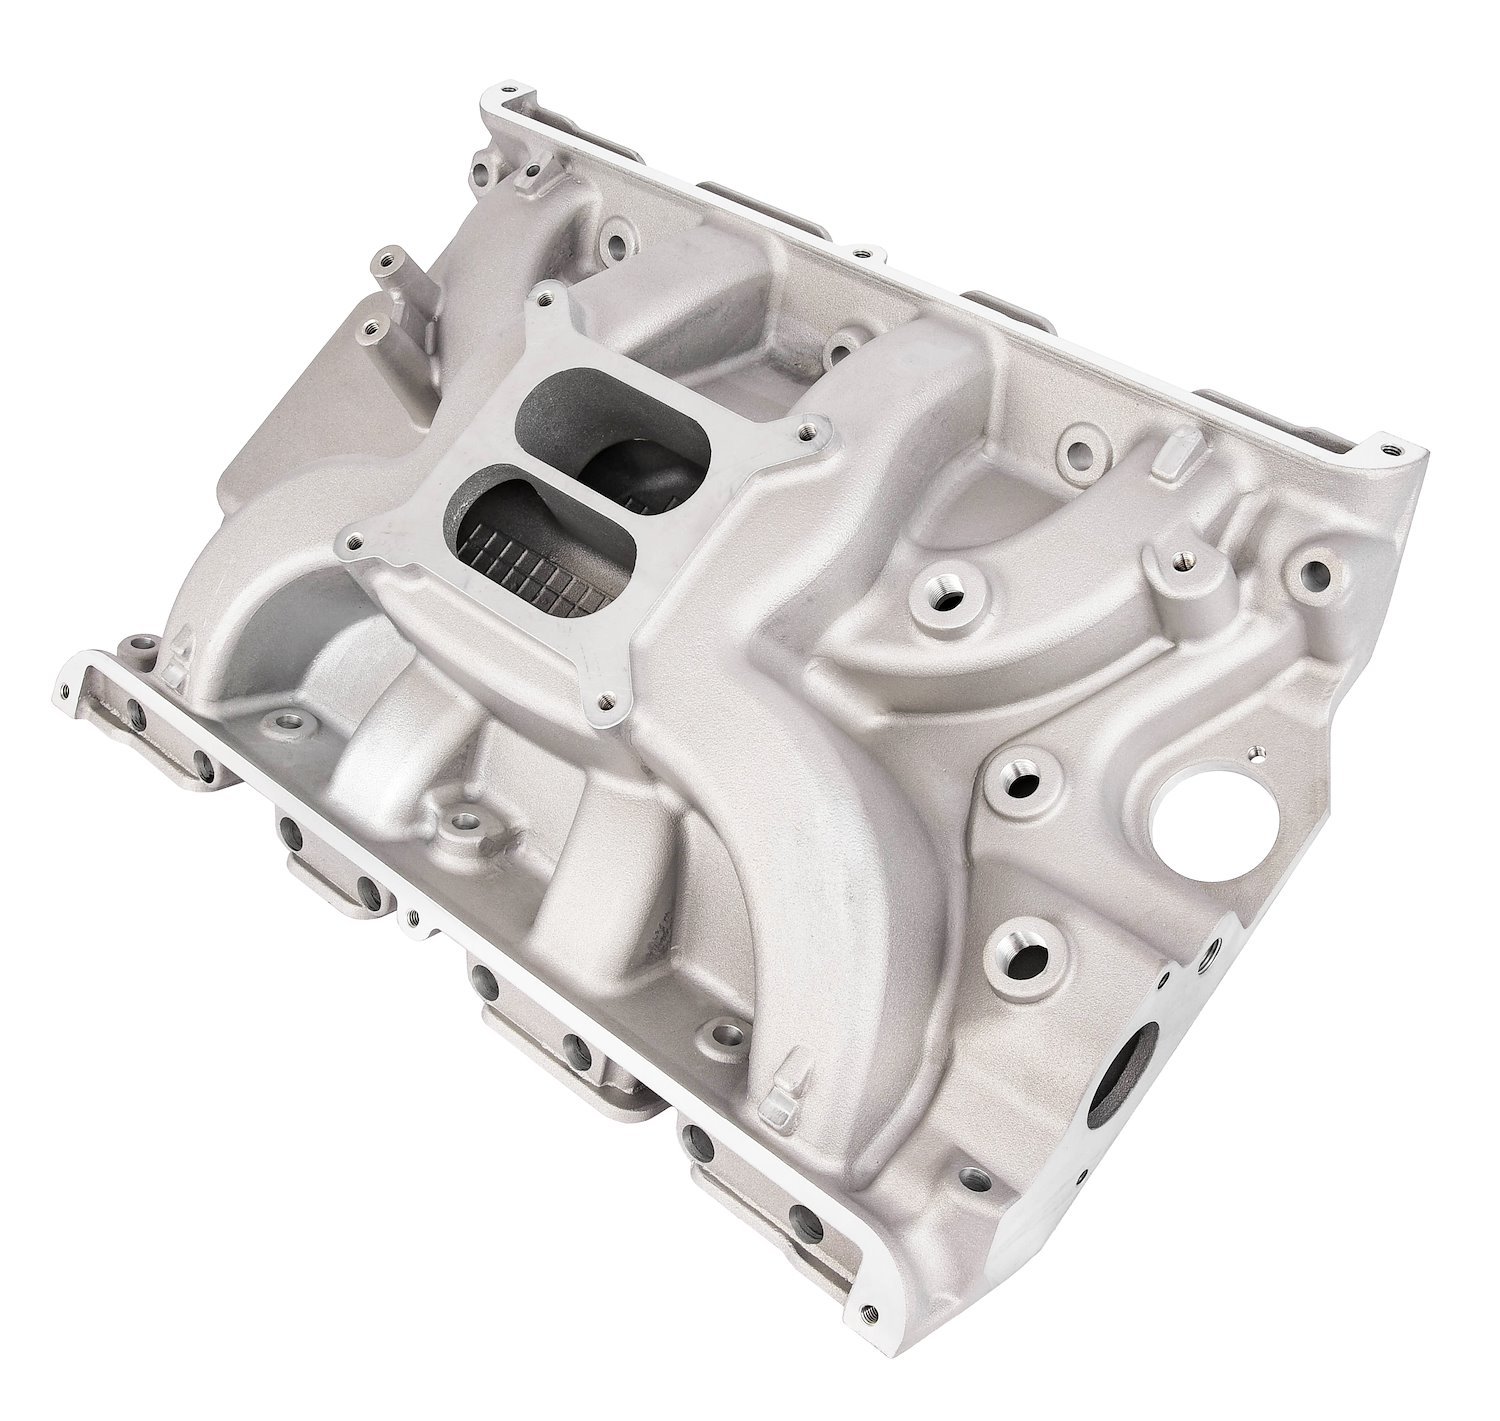 Intake Manifold for Ford 332-428 FE Series Engines, Dual Plane [Satin]